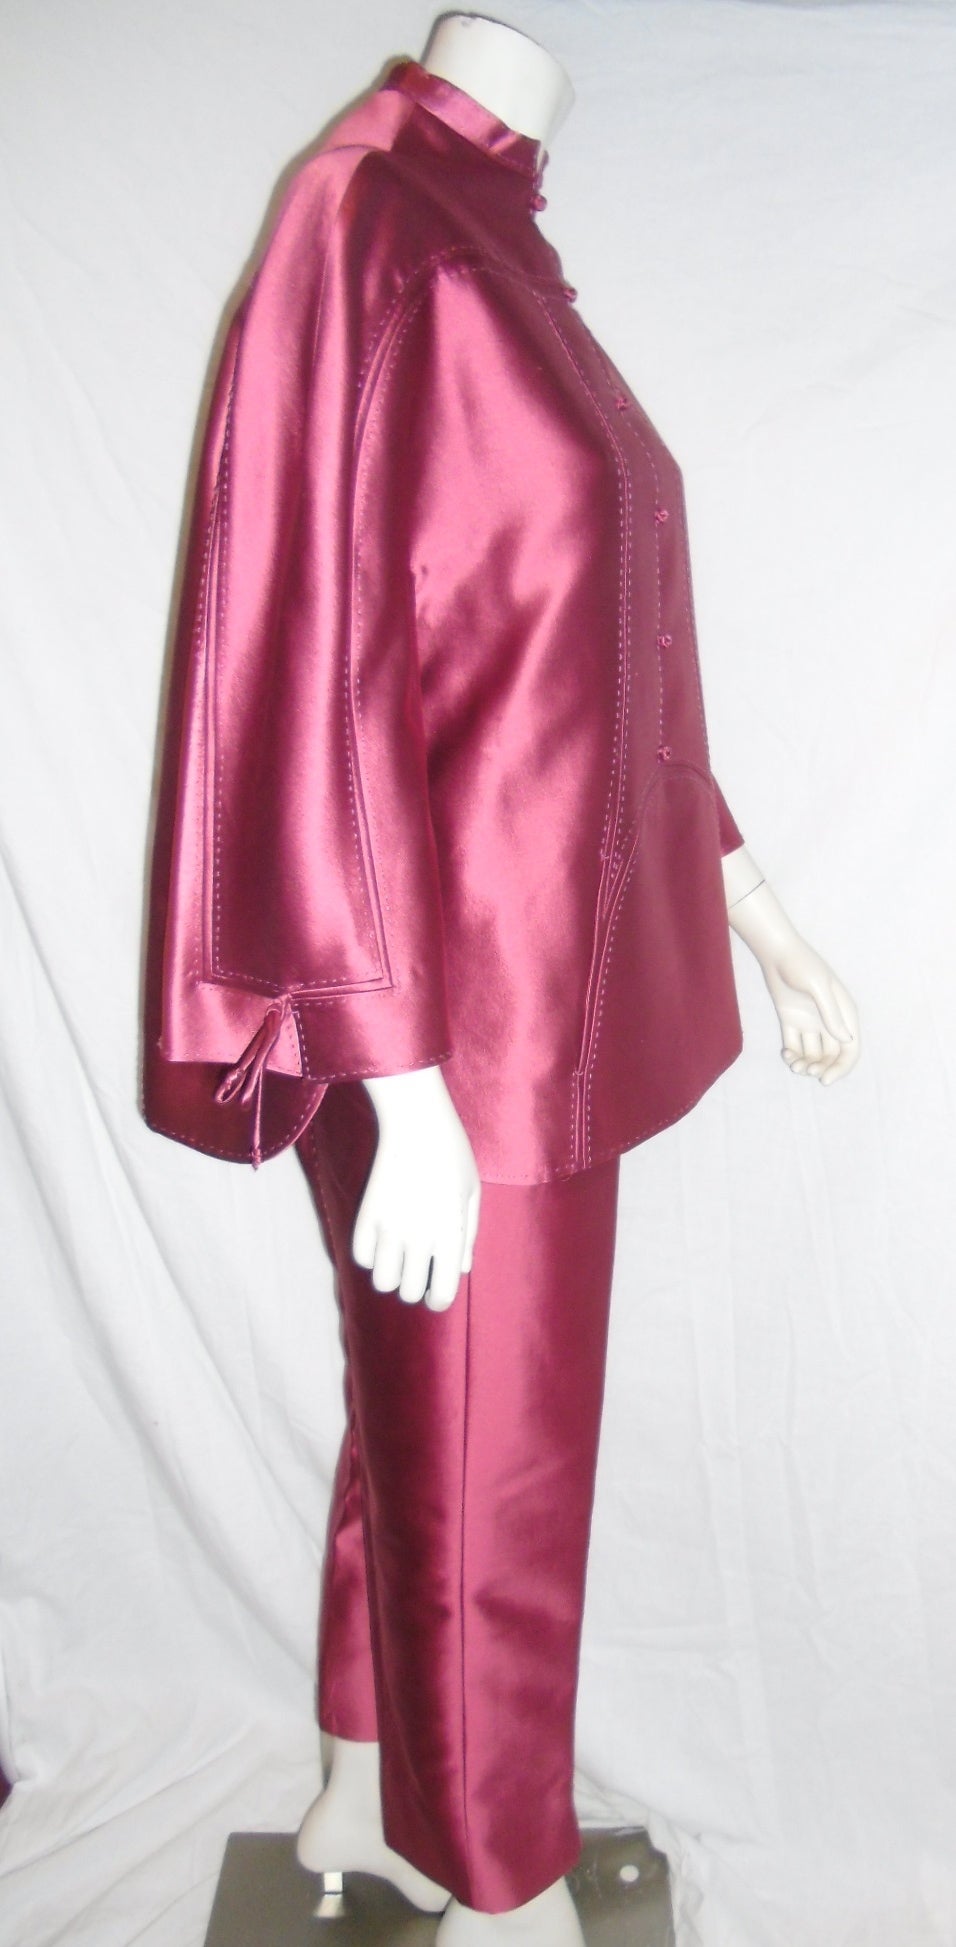 Chado Ralph Rucci new Stunning evening pant suit sz 10 For Sale 2